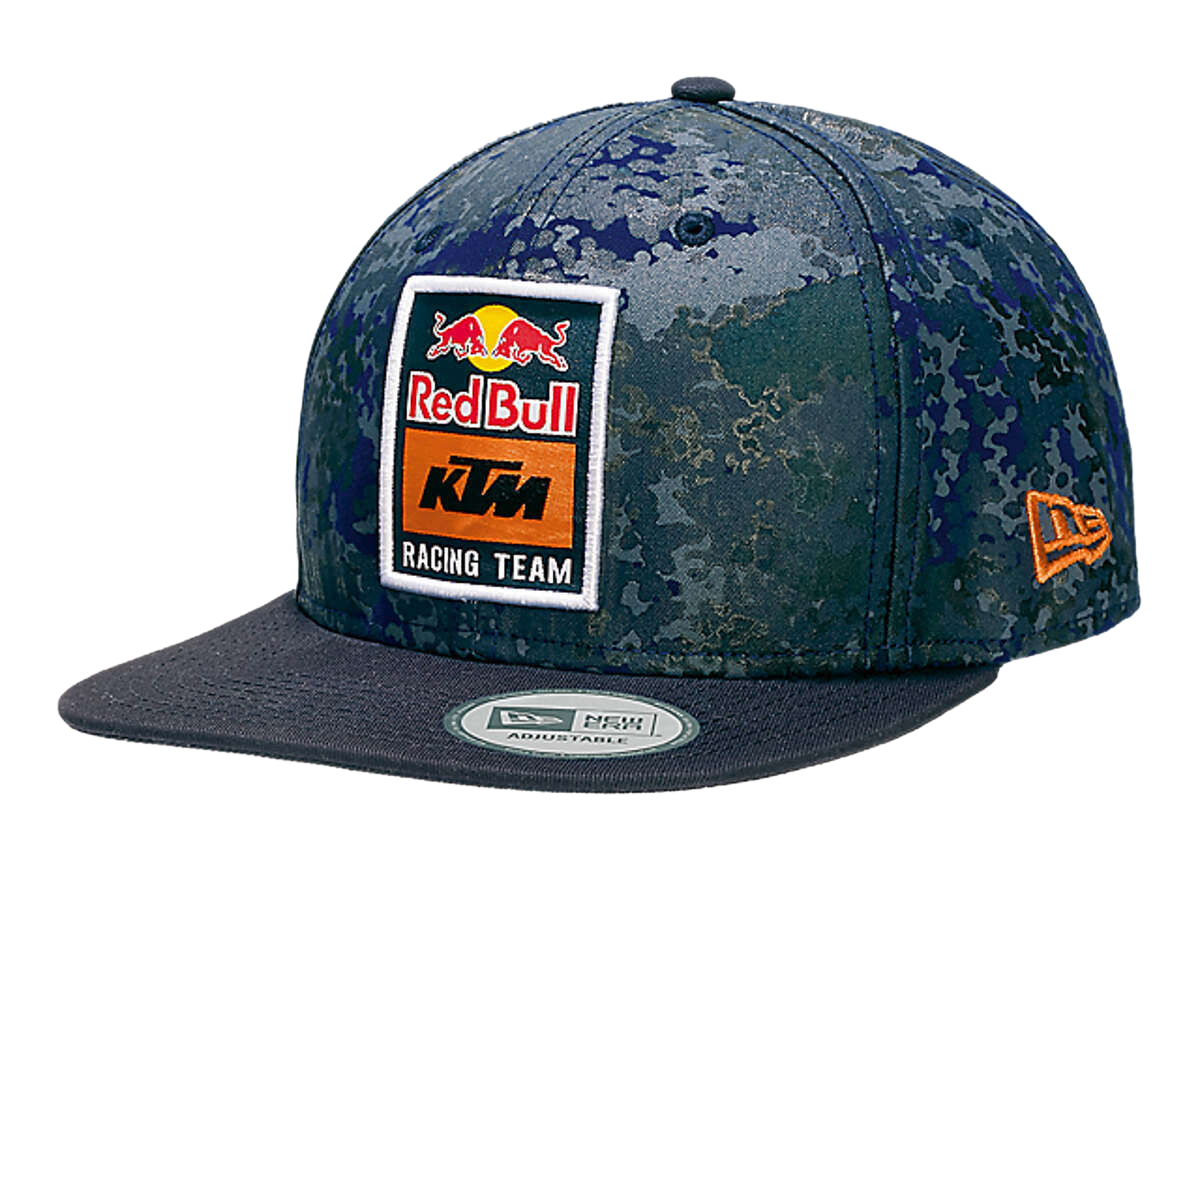 Red Bull Cappellino Snap Back KTM Racing Team Camo - Navy Camouflage